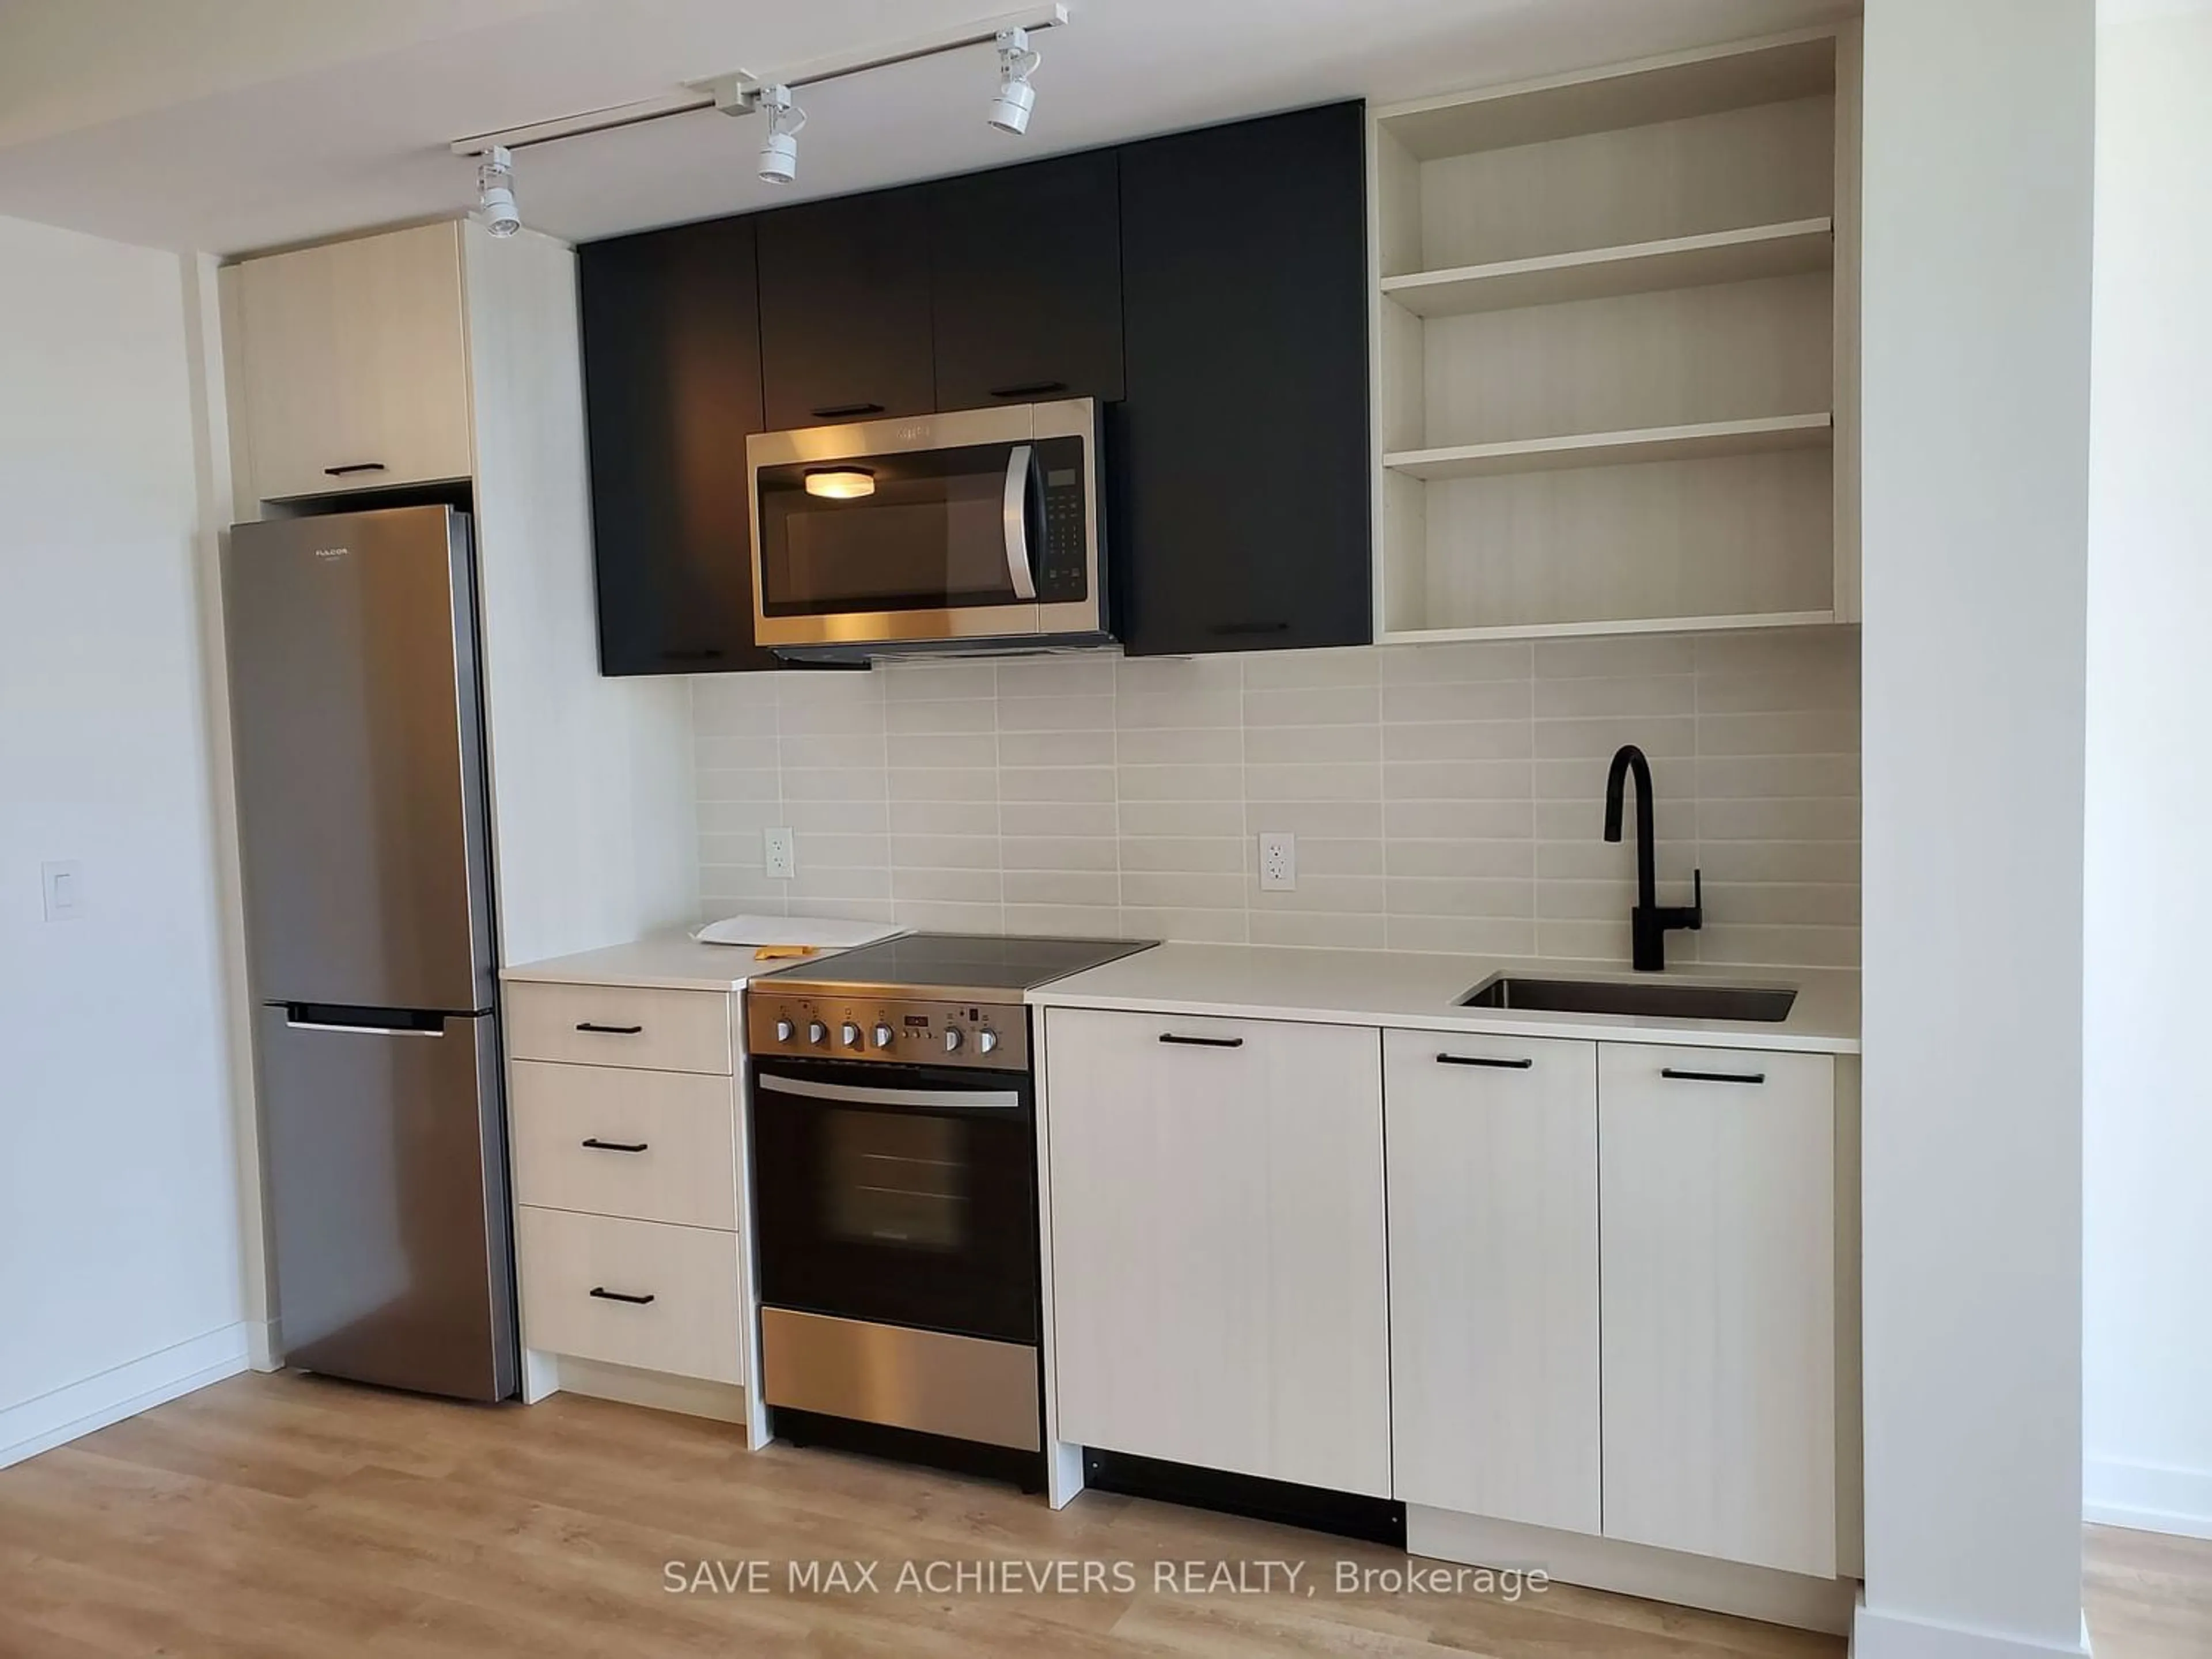 Standard kitchen for 2300 St Clair Ave #613, Toronto Ontario M6N 1K8